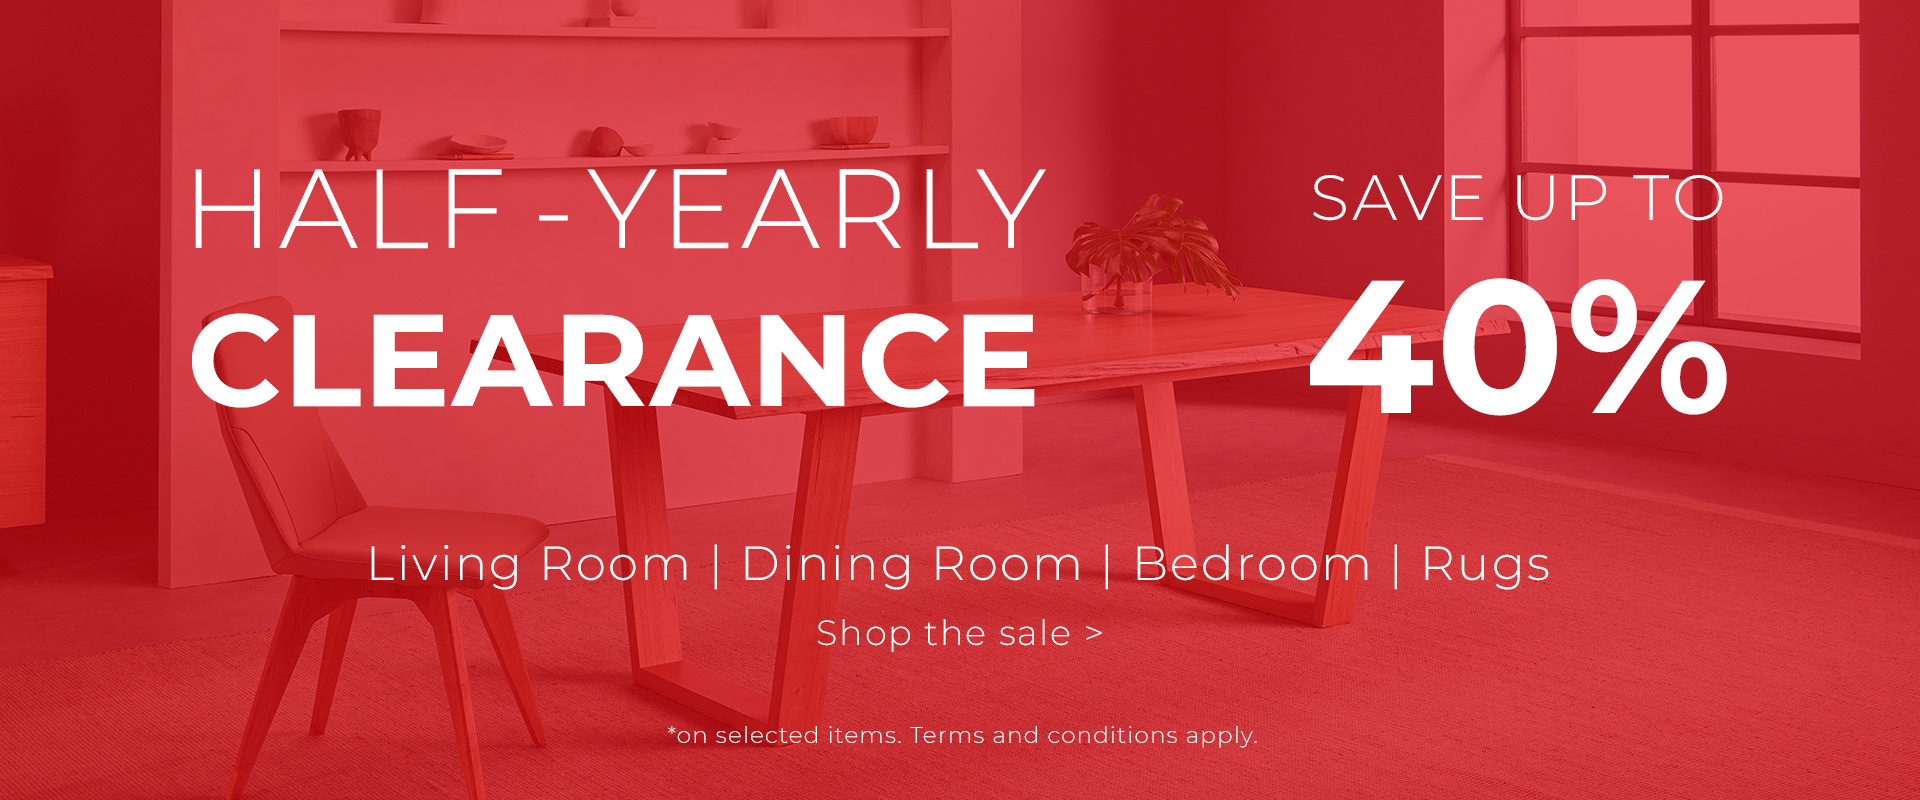 Save up to 40% OFF on Nick Scali Half Yearly clearance sale